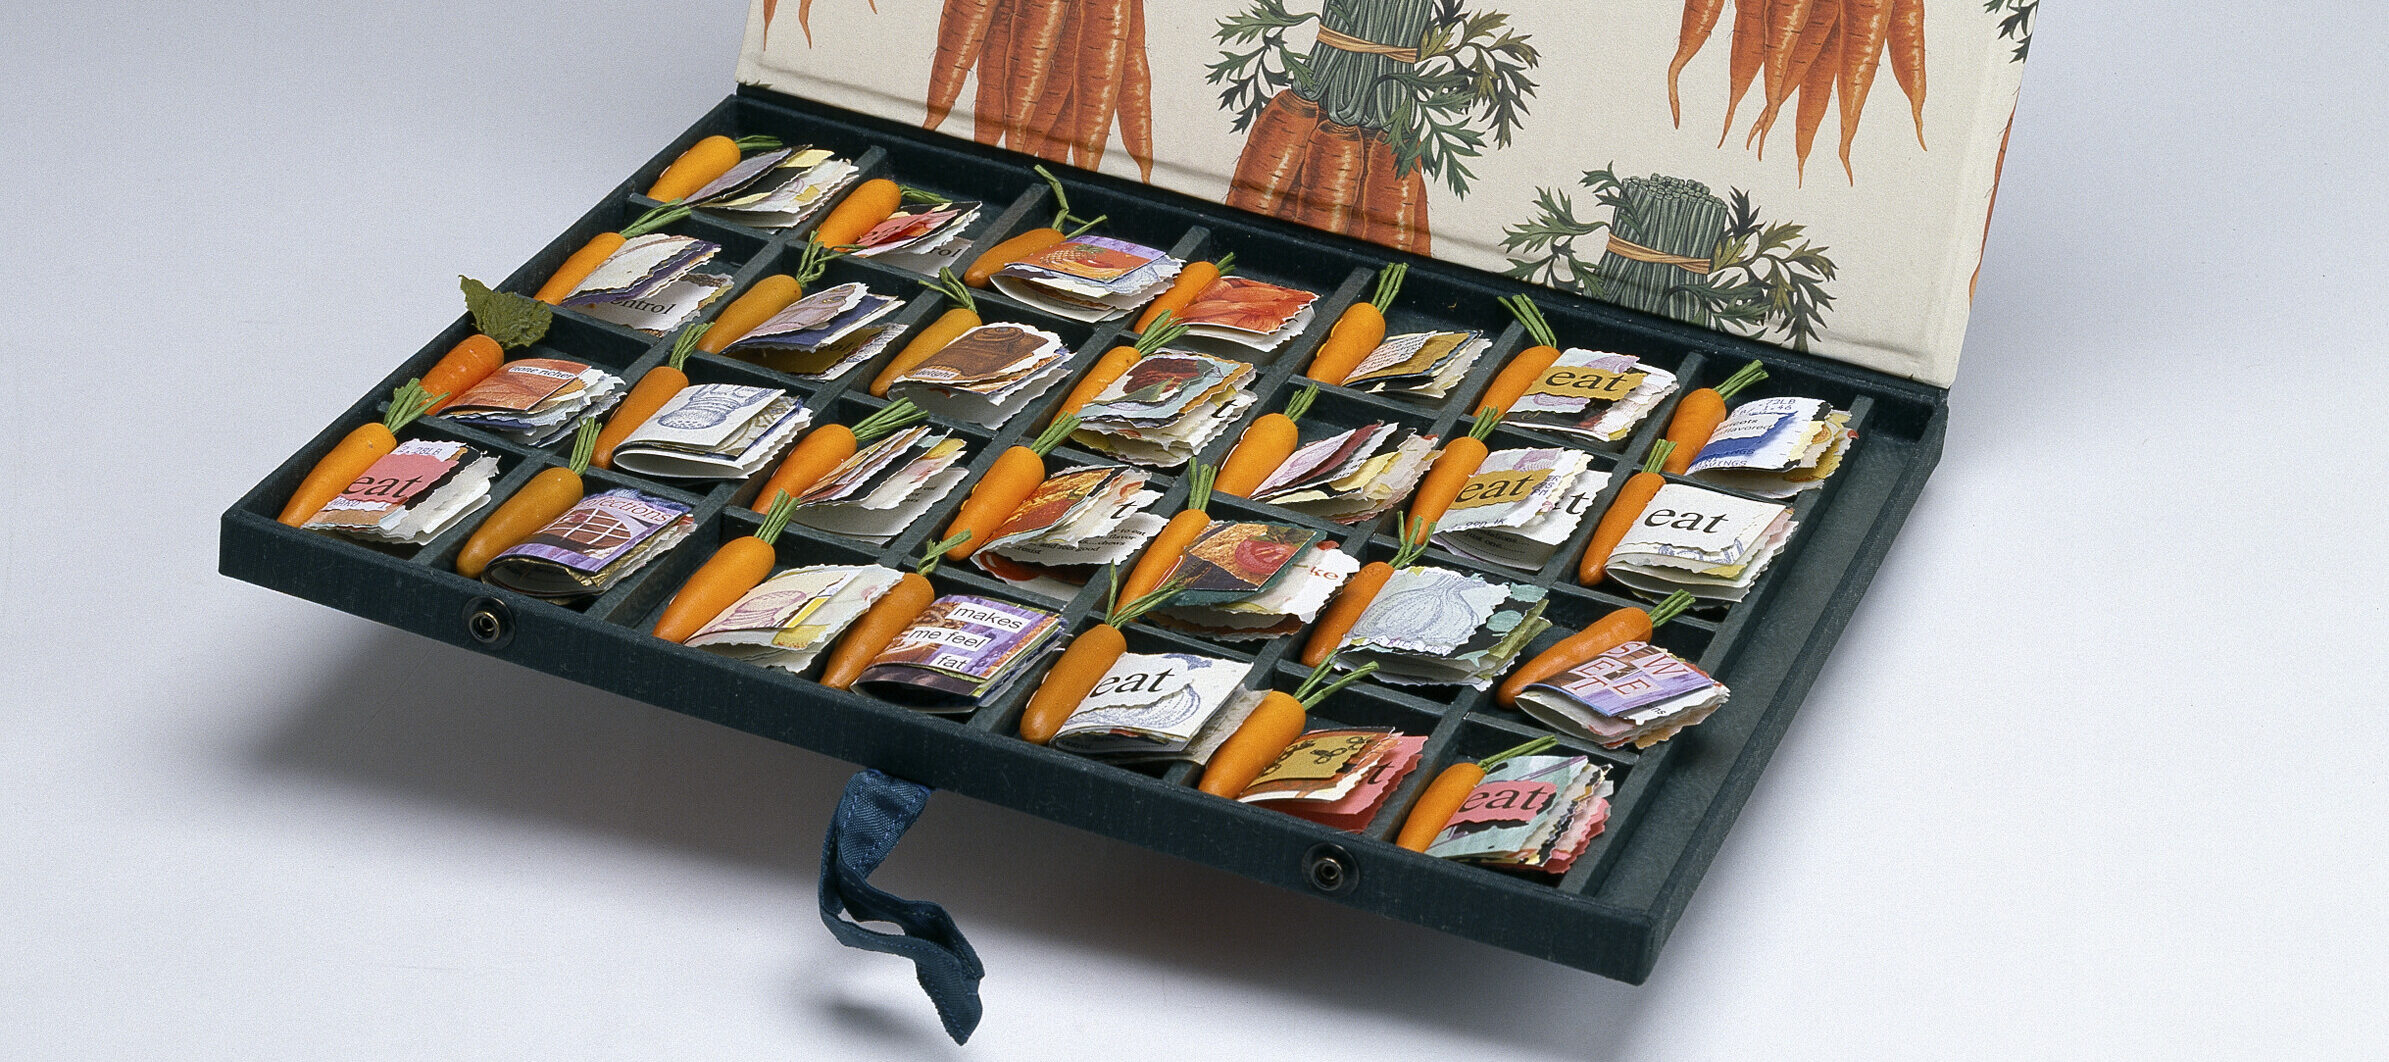 Color photograph of an an open box with a flap lid and small books inside. The inside of the box lid has images of bunches of carrots. The box has 28 cavities, each which holds a small book with a three-dimensional carrot spine.